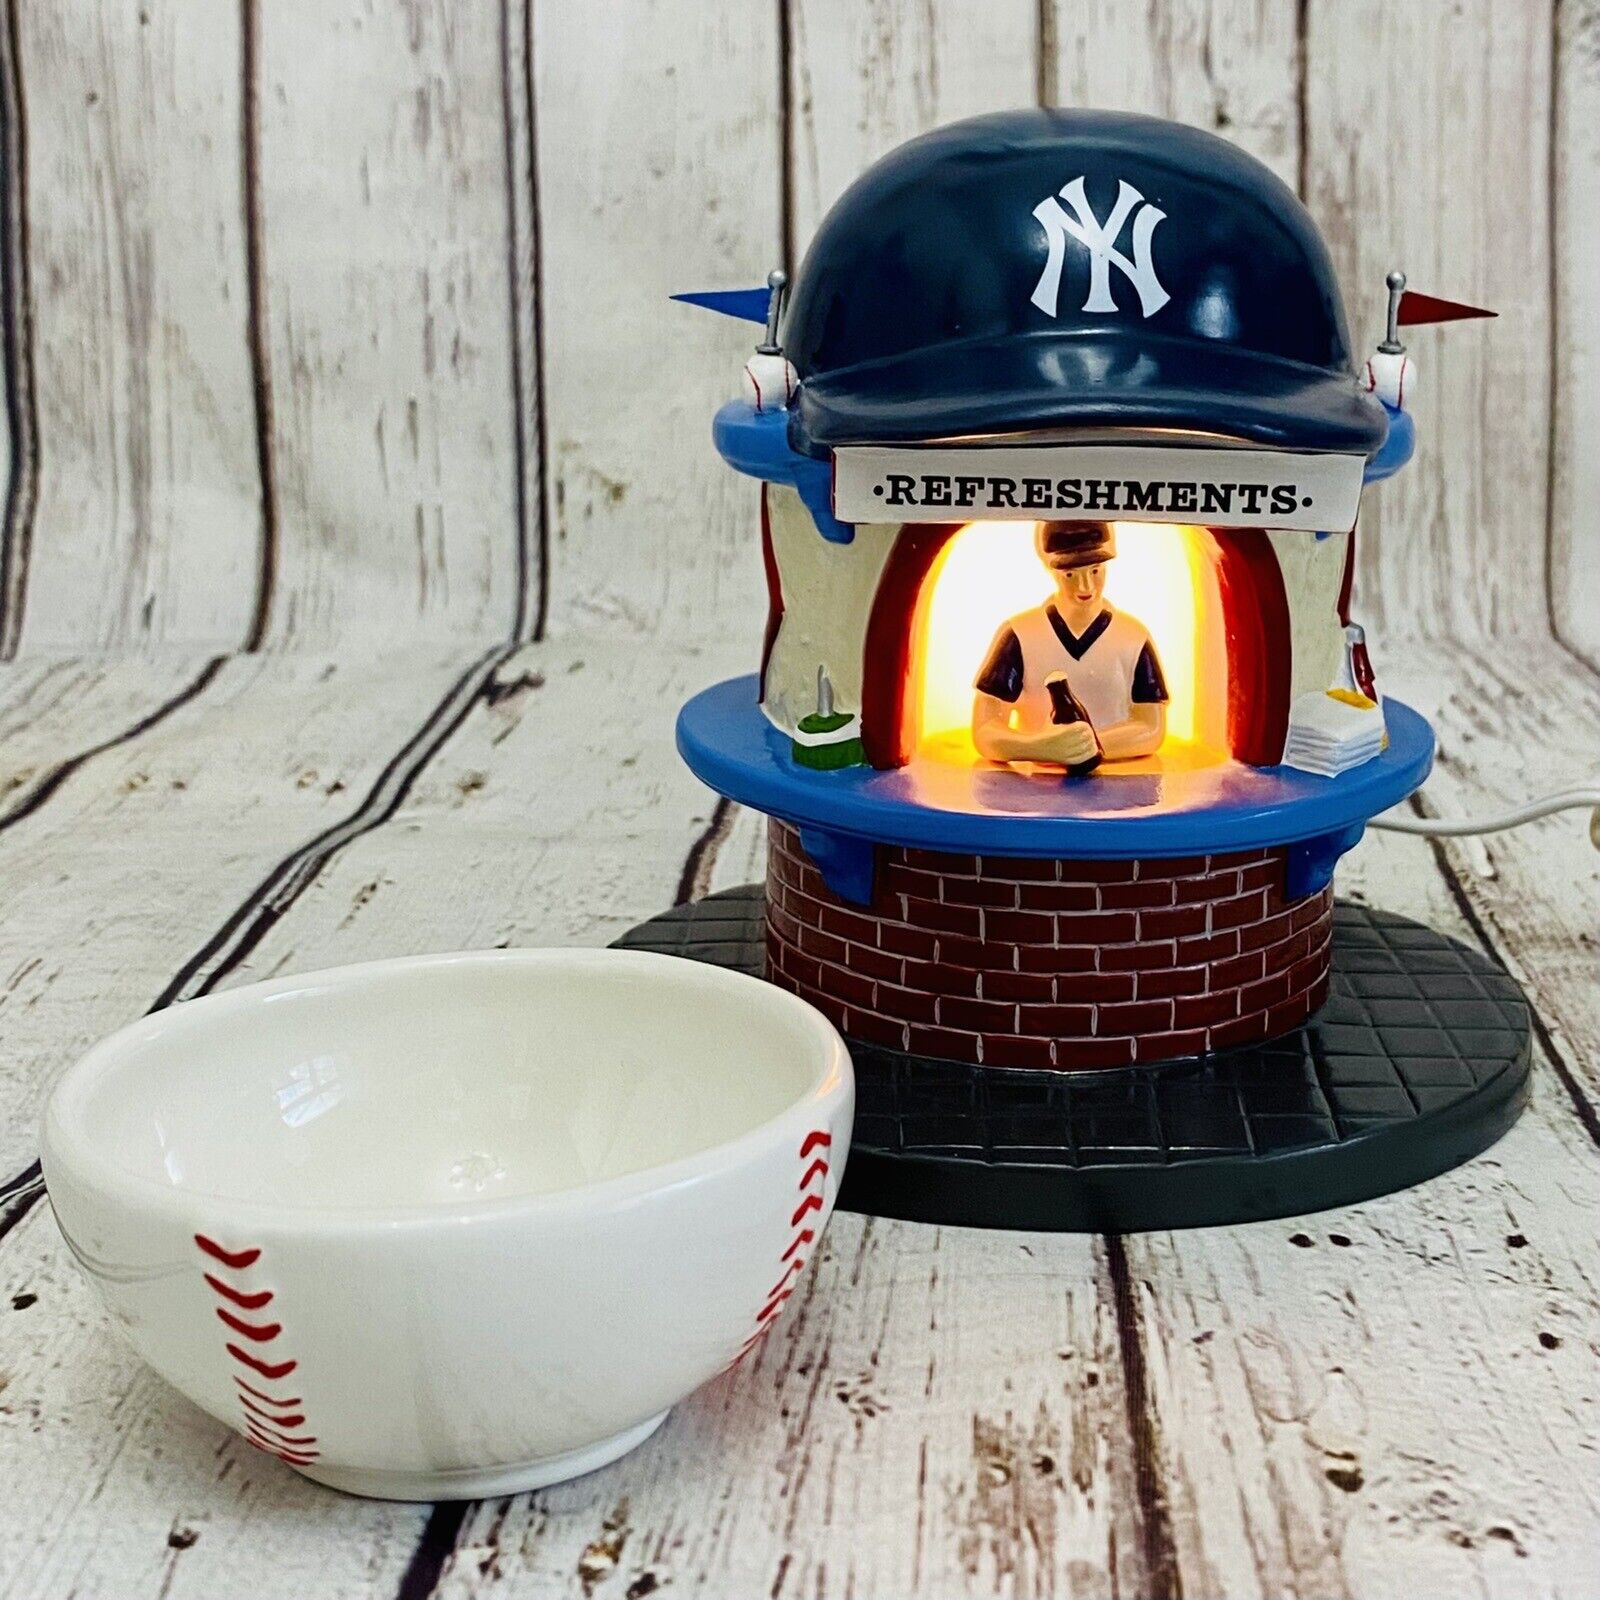 Dept 56 NY Yankees Lighted Ceramic Refreshments Stand Light Up & Snack Dish